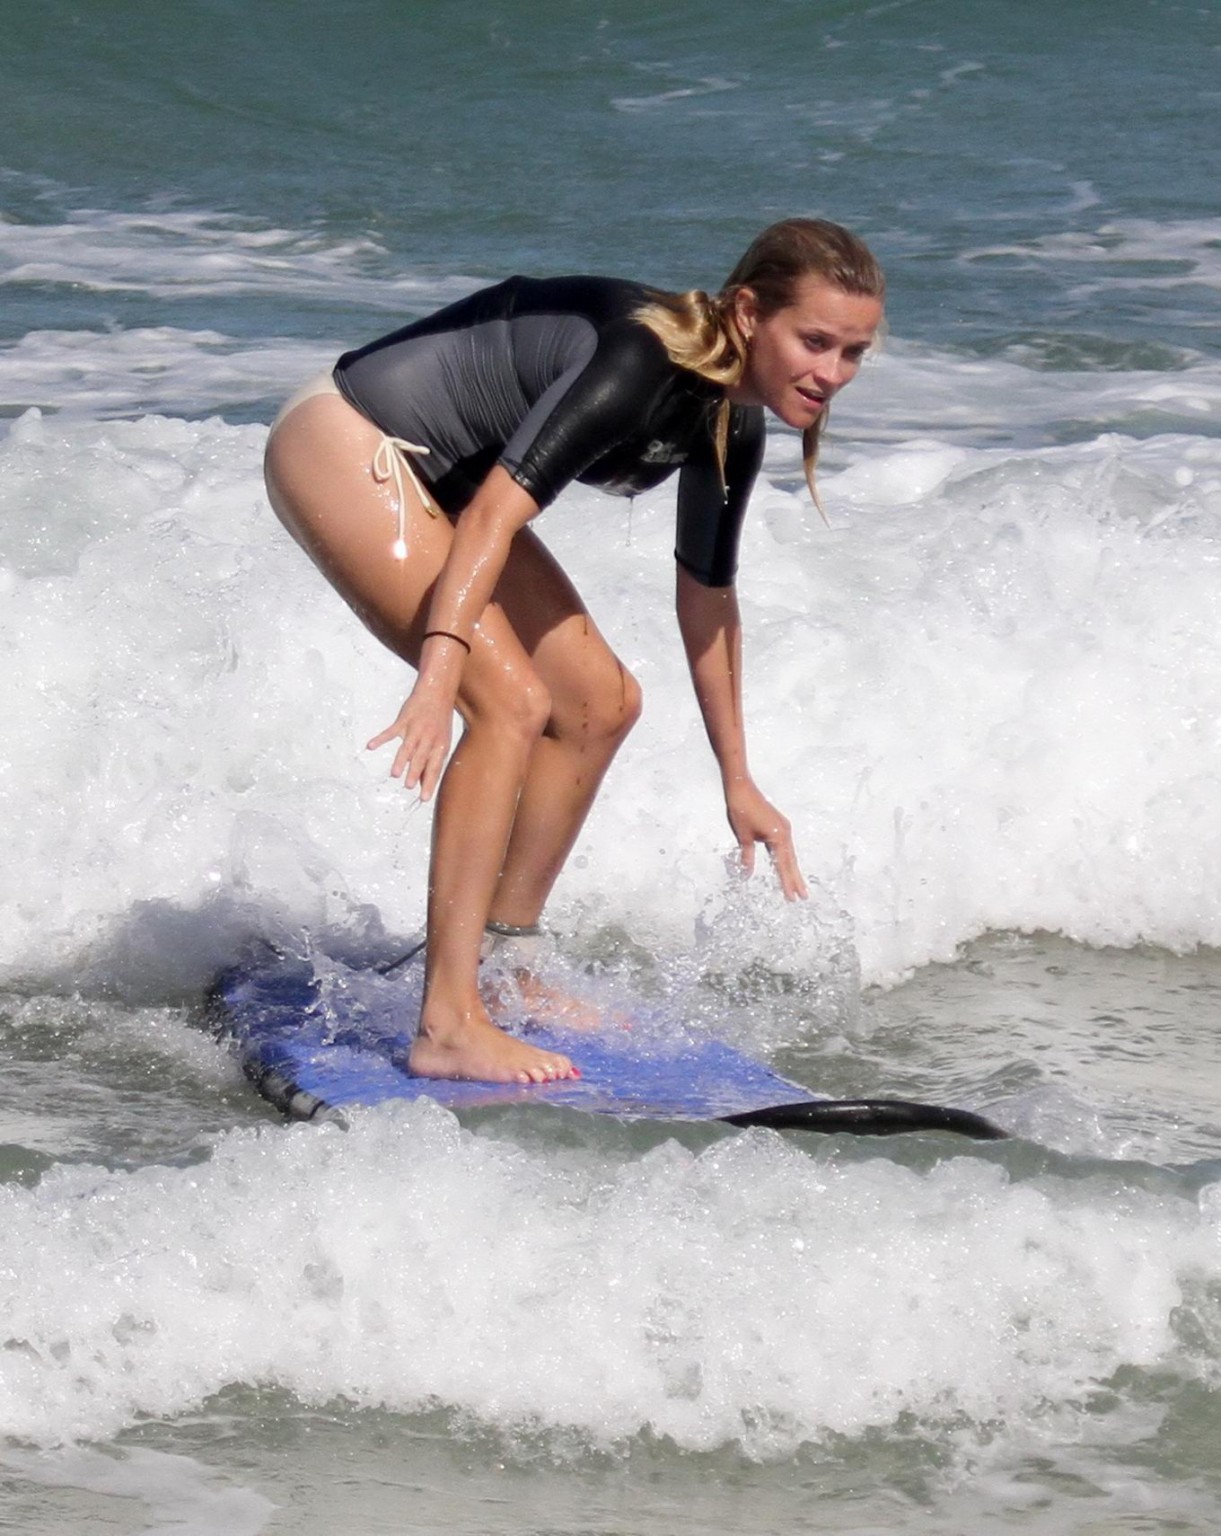 Reese Witherspoon mostra il suo culo mentre fa surf alle Hawaii
 #75291194